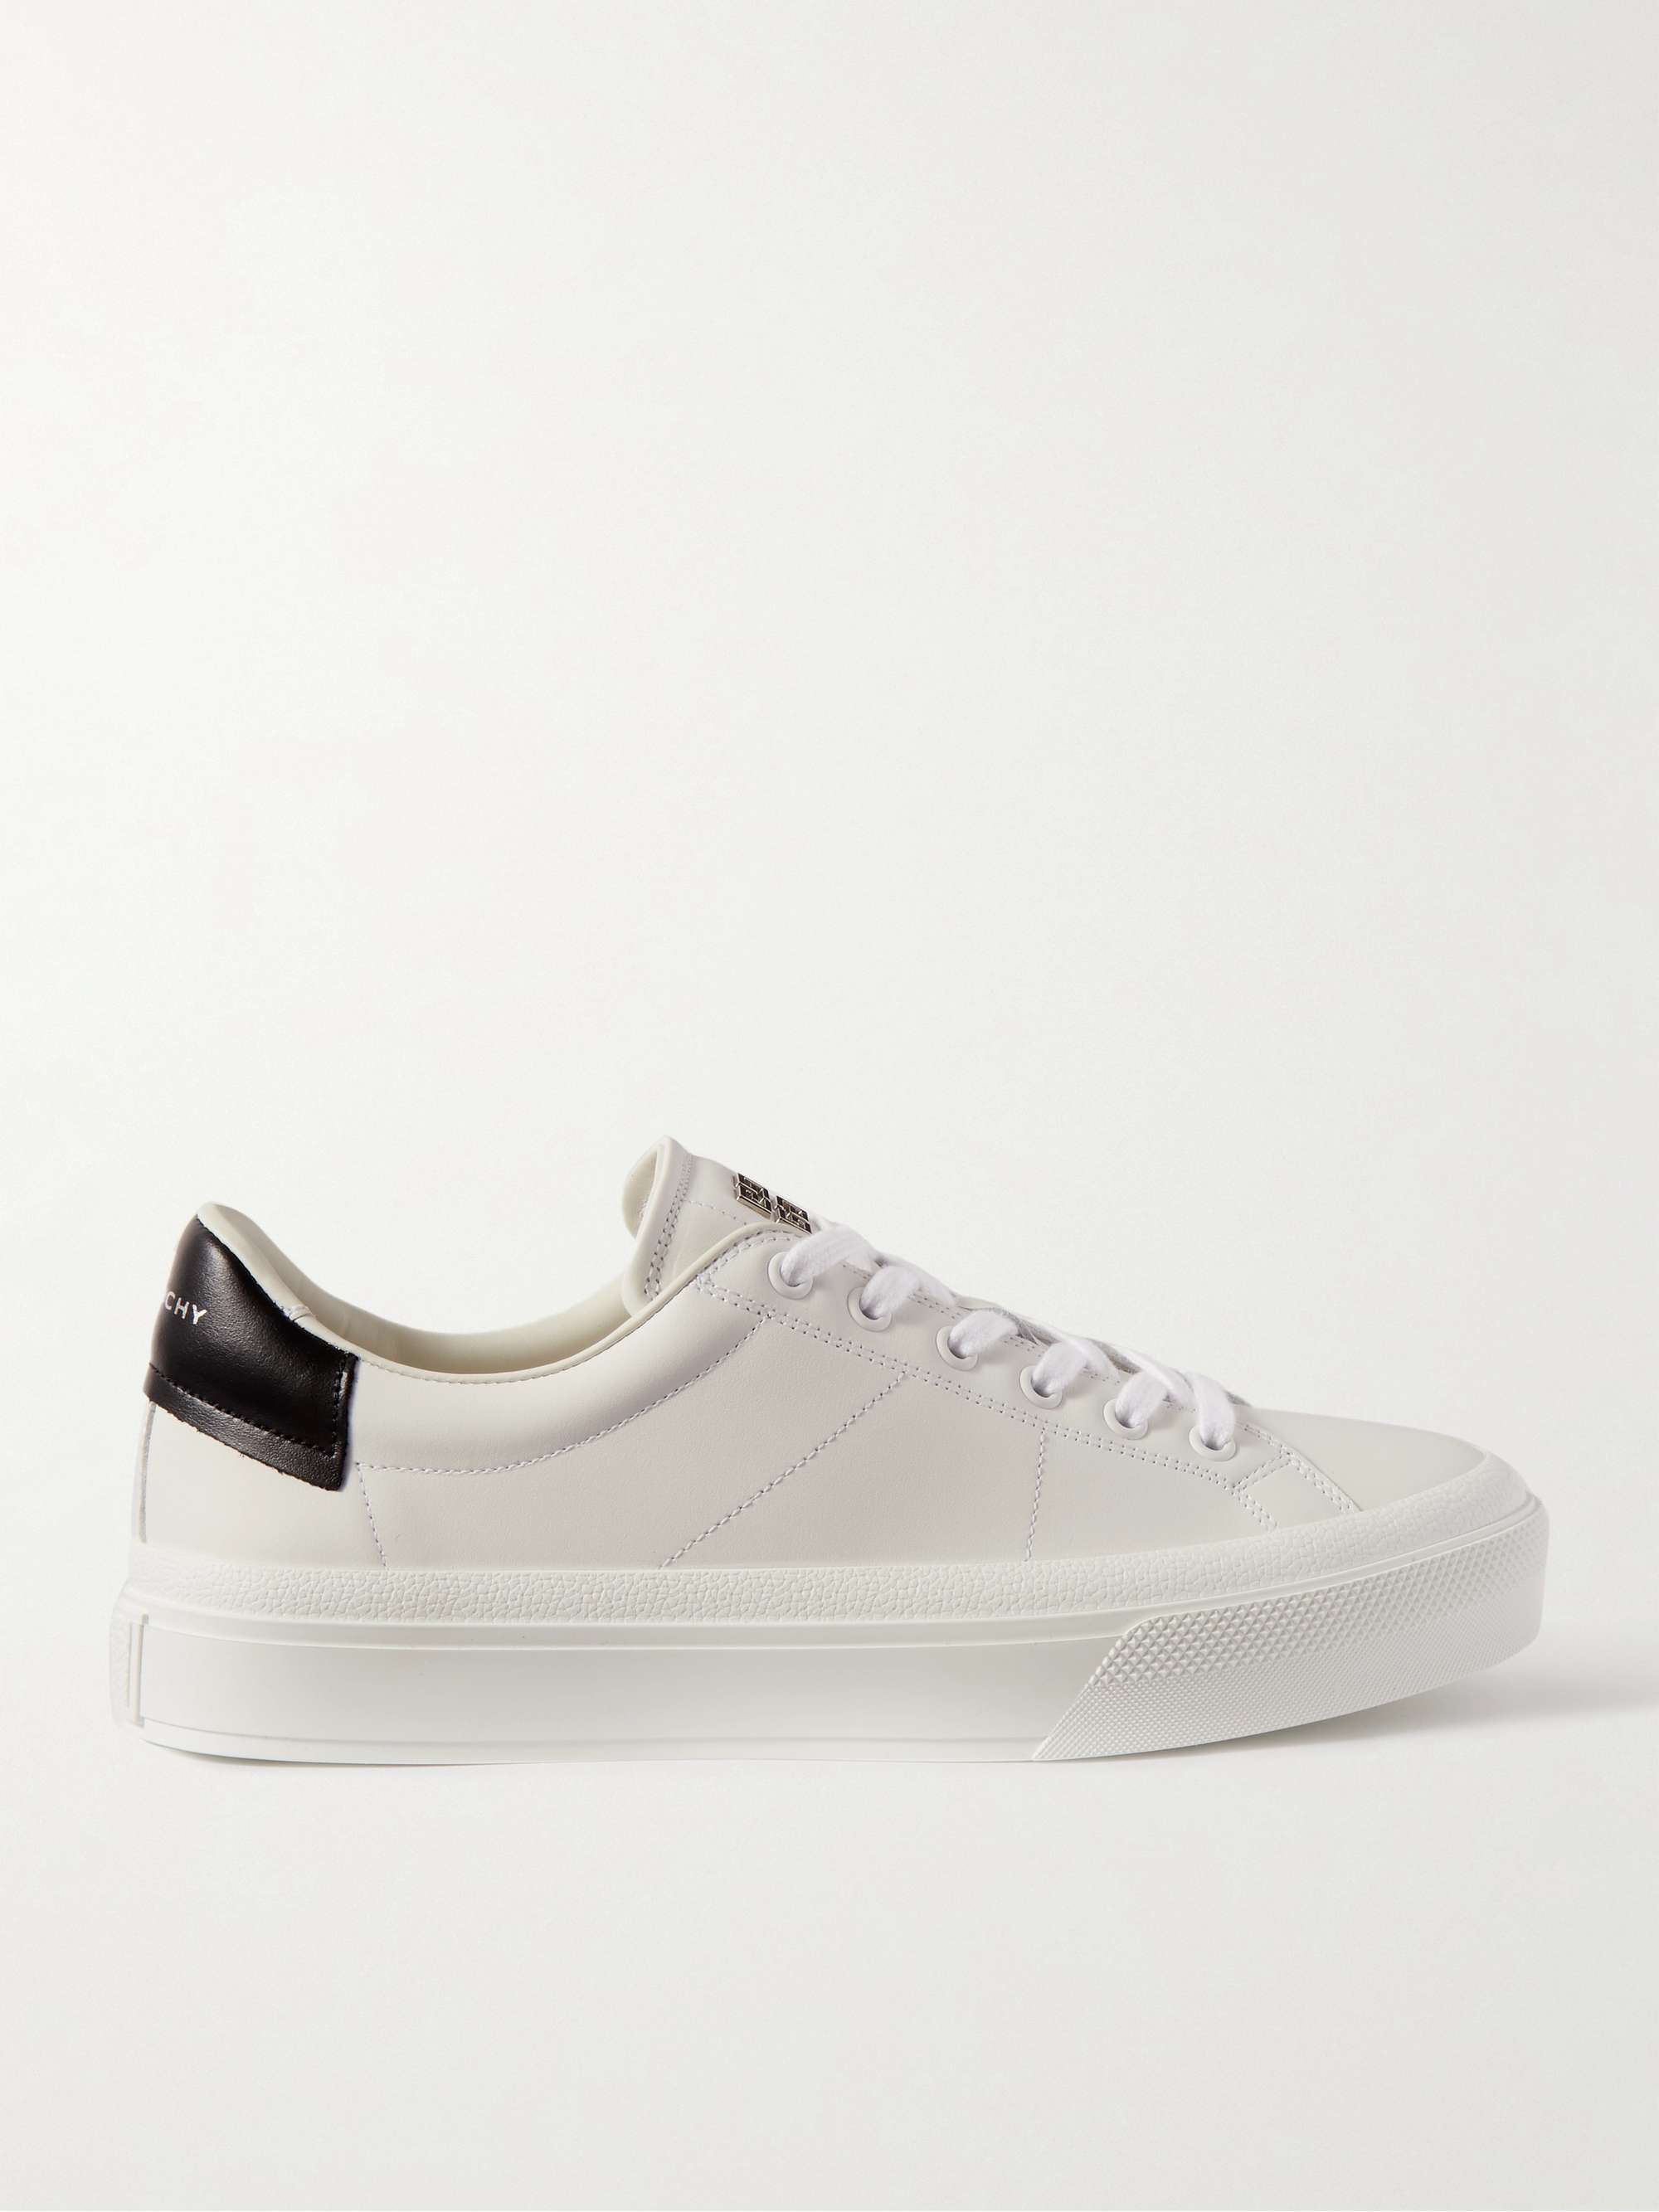 GIVENCHY City Sport Leather Sneakers | MR PORTER